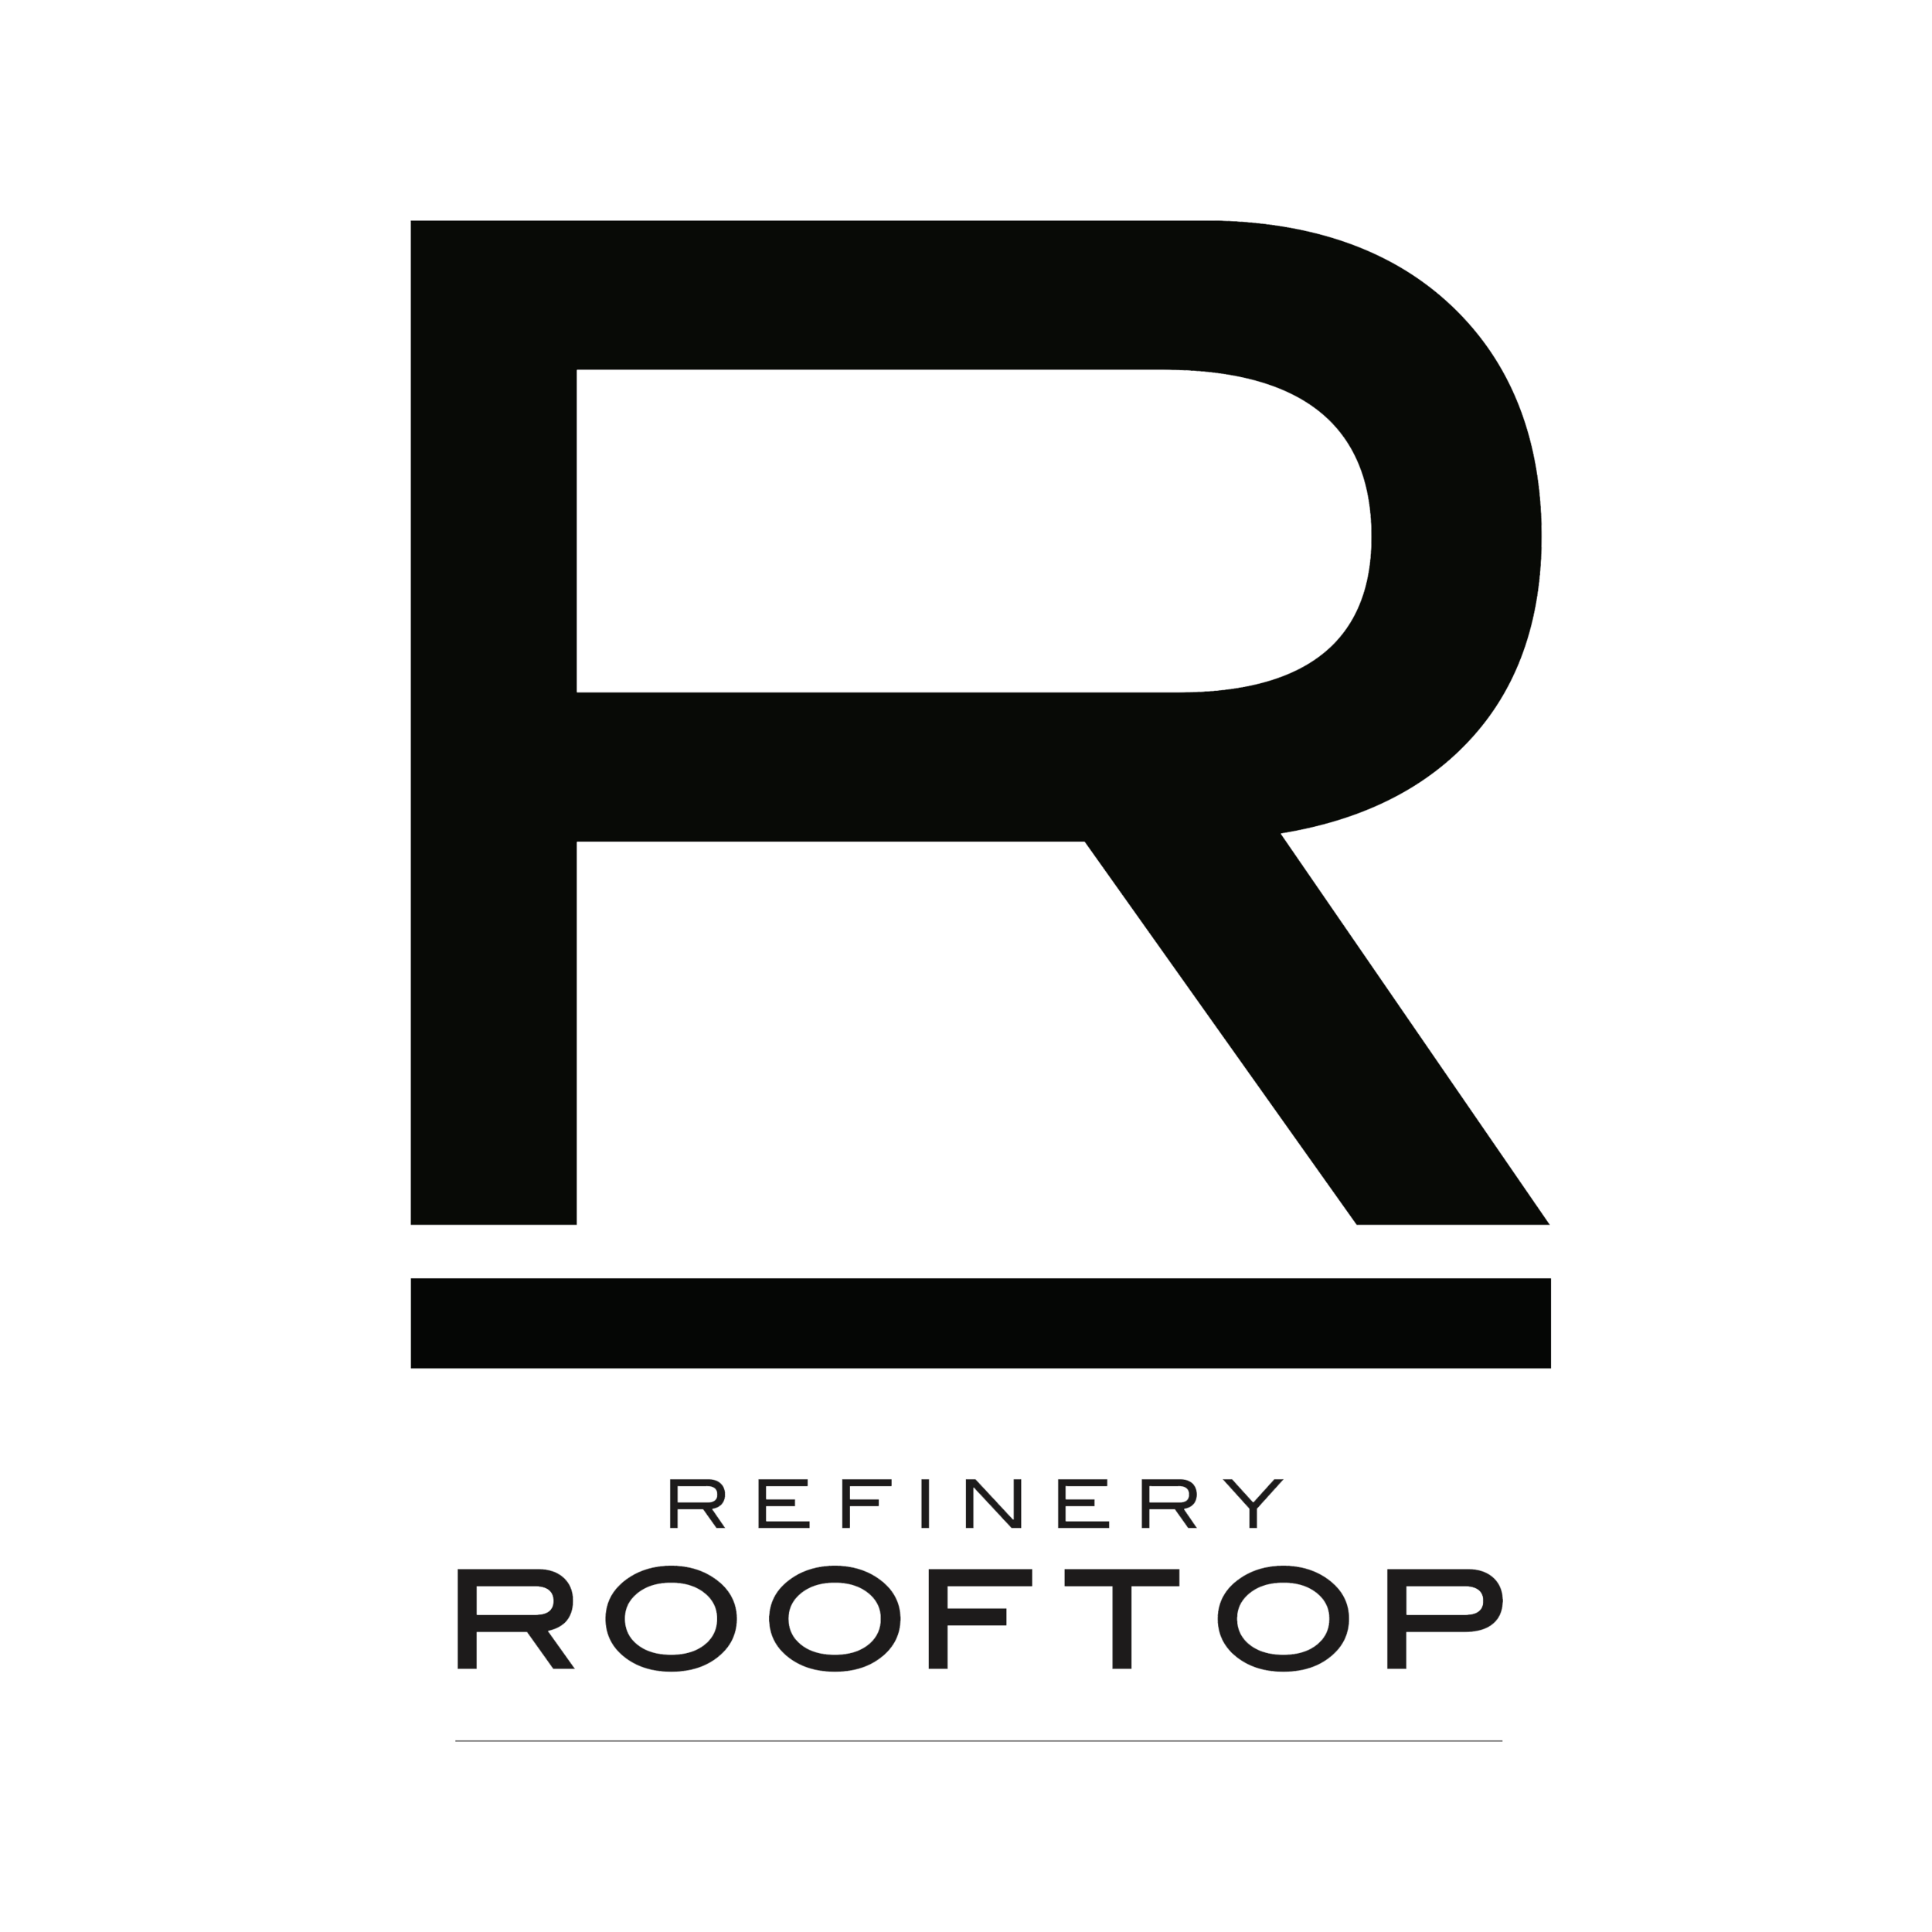 Refinery rooftop no background .png